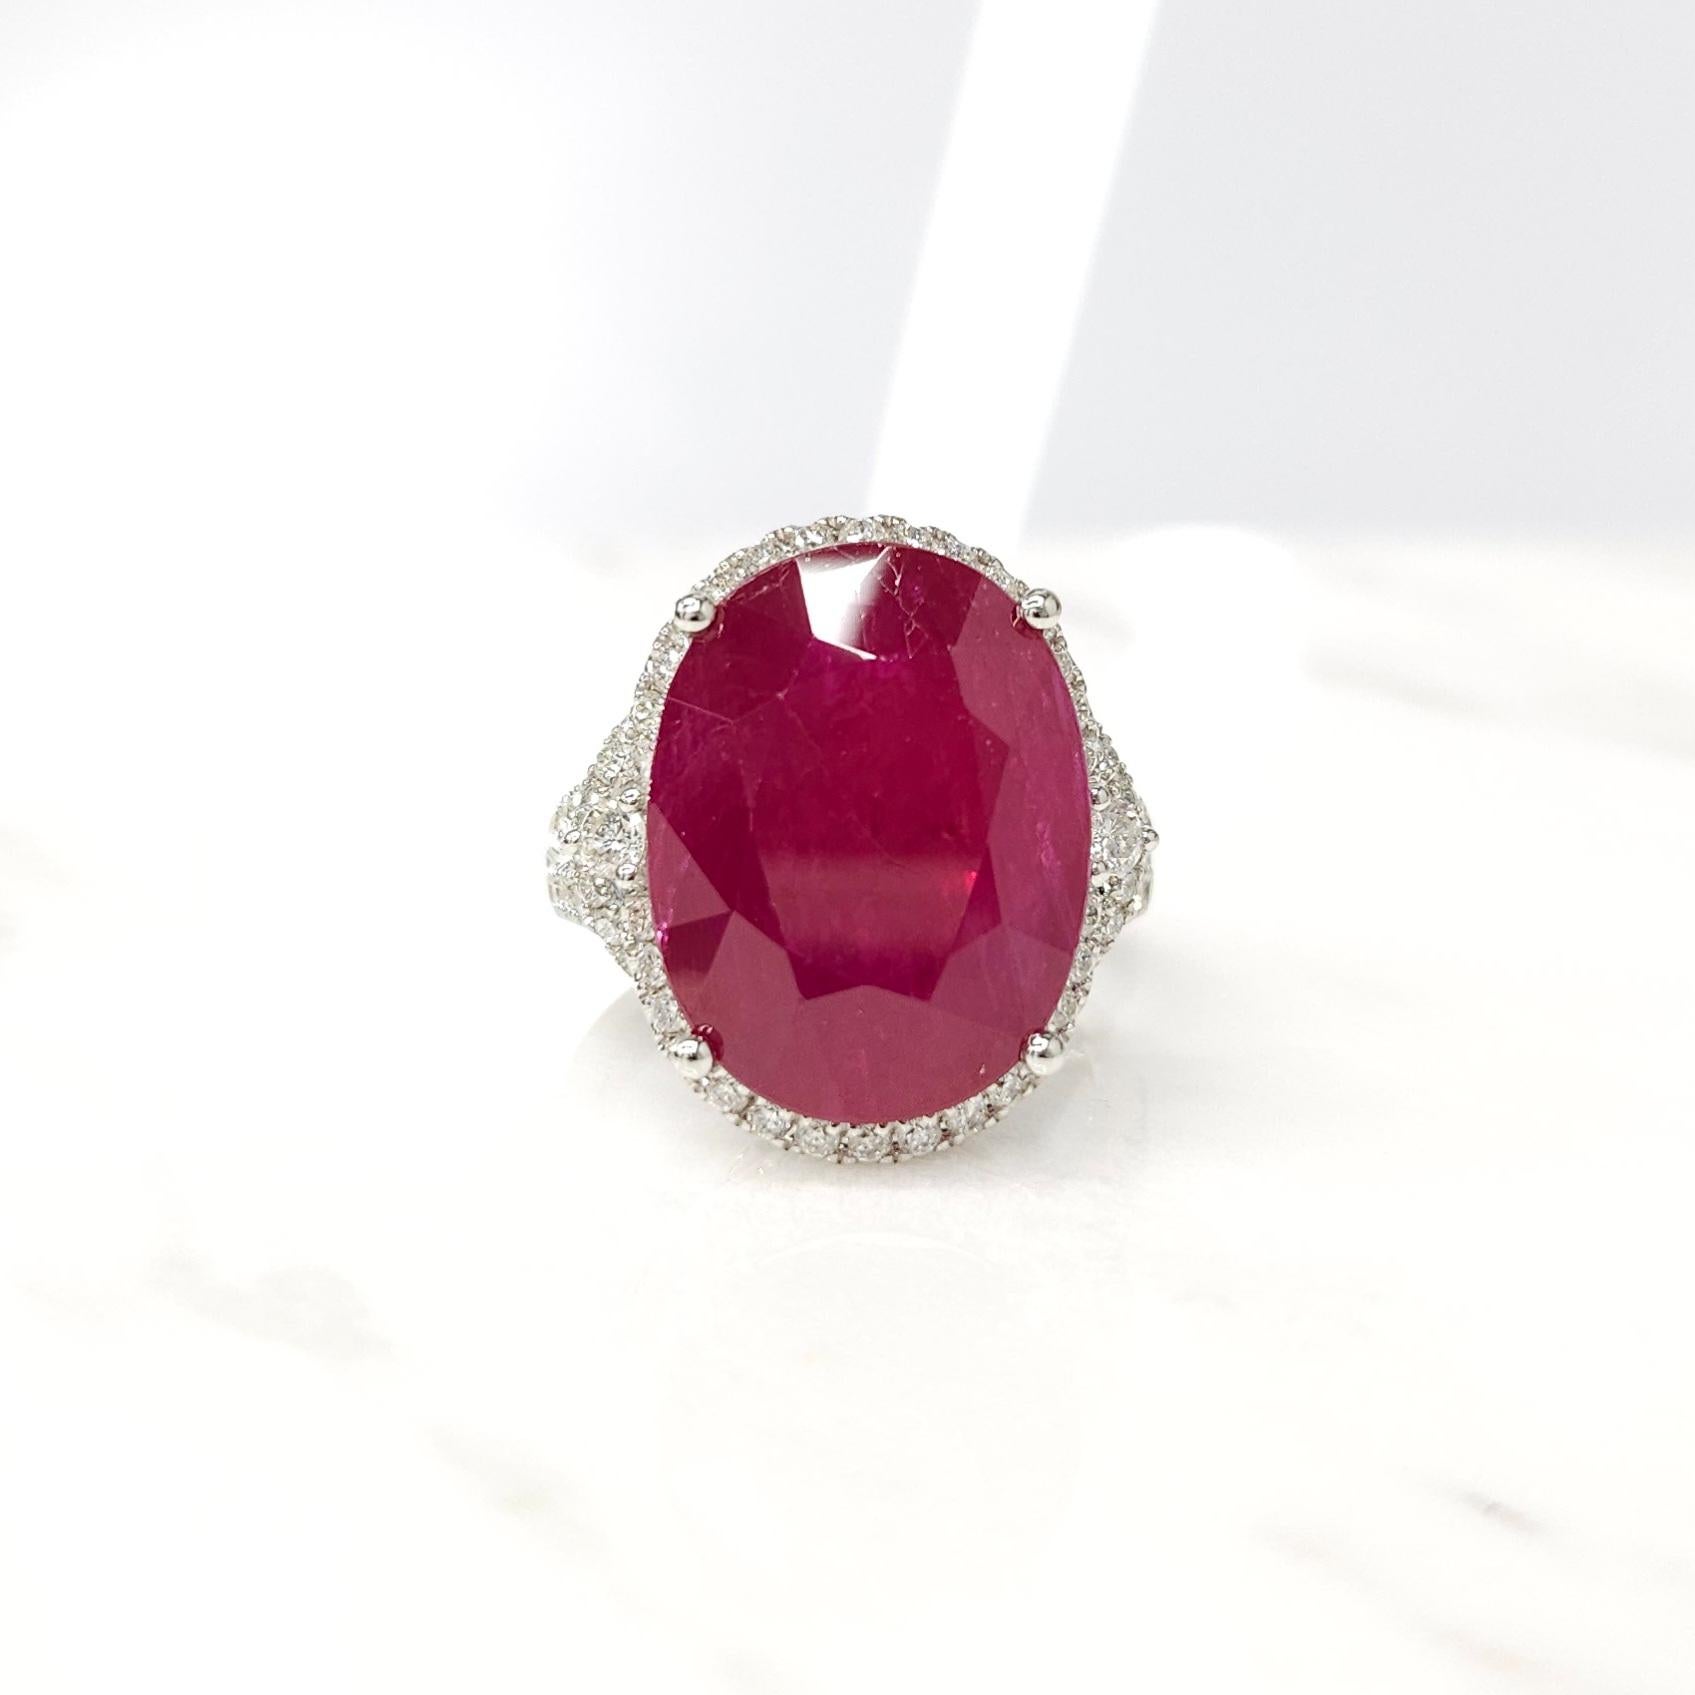 Introducing a truly extraordinary piece of jewelry, the IGI Certified 14.13 Carat Burma Ruby and Diamond Halo Ring. This ring is a testament to the unparalleled beauty and exceptional rarity of its centerpiece, a breathtaking 14.13 carat Burma